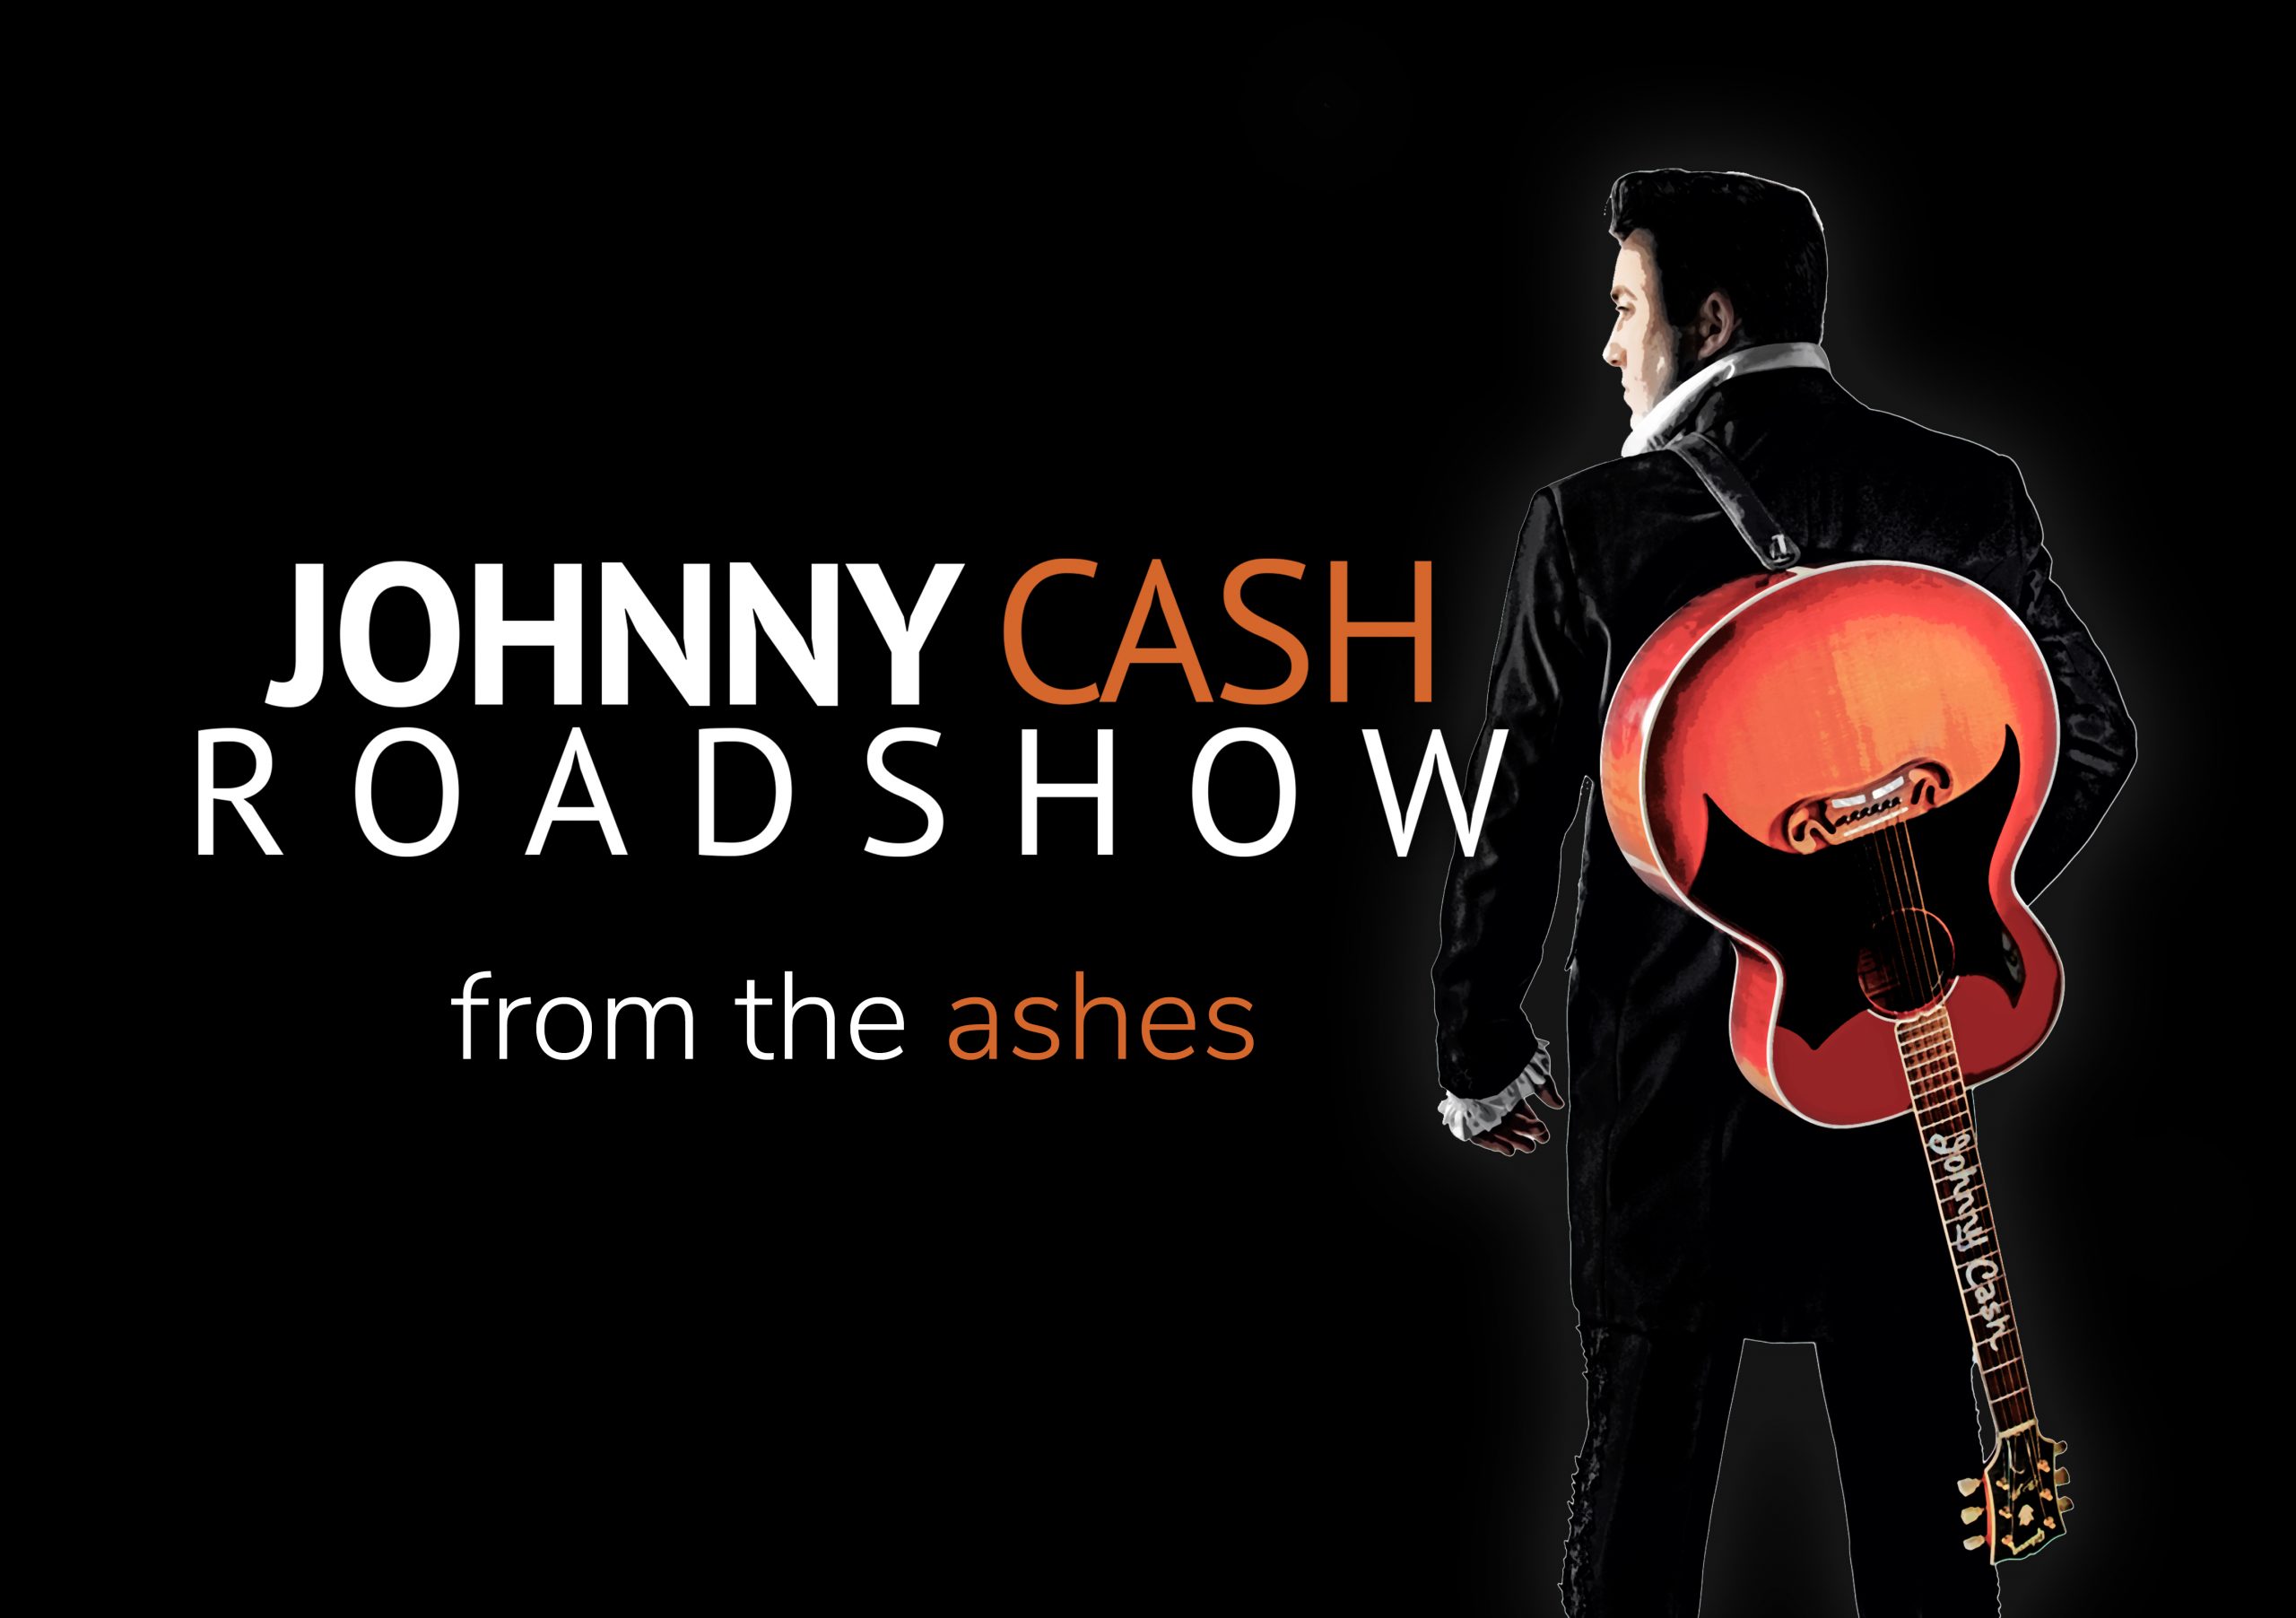 Johnny Cash fromthe ashes 2021 – 4620x3256px